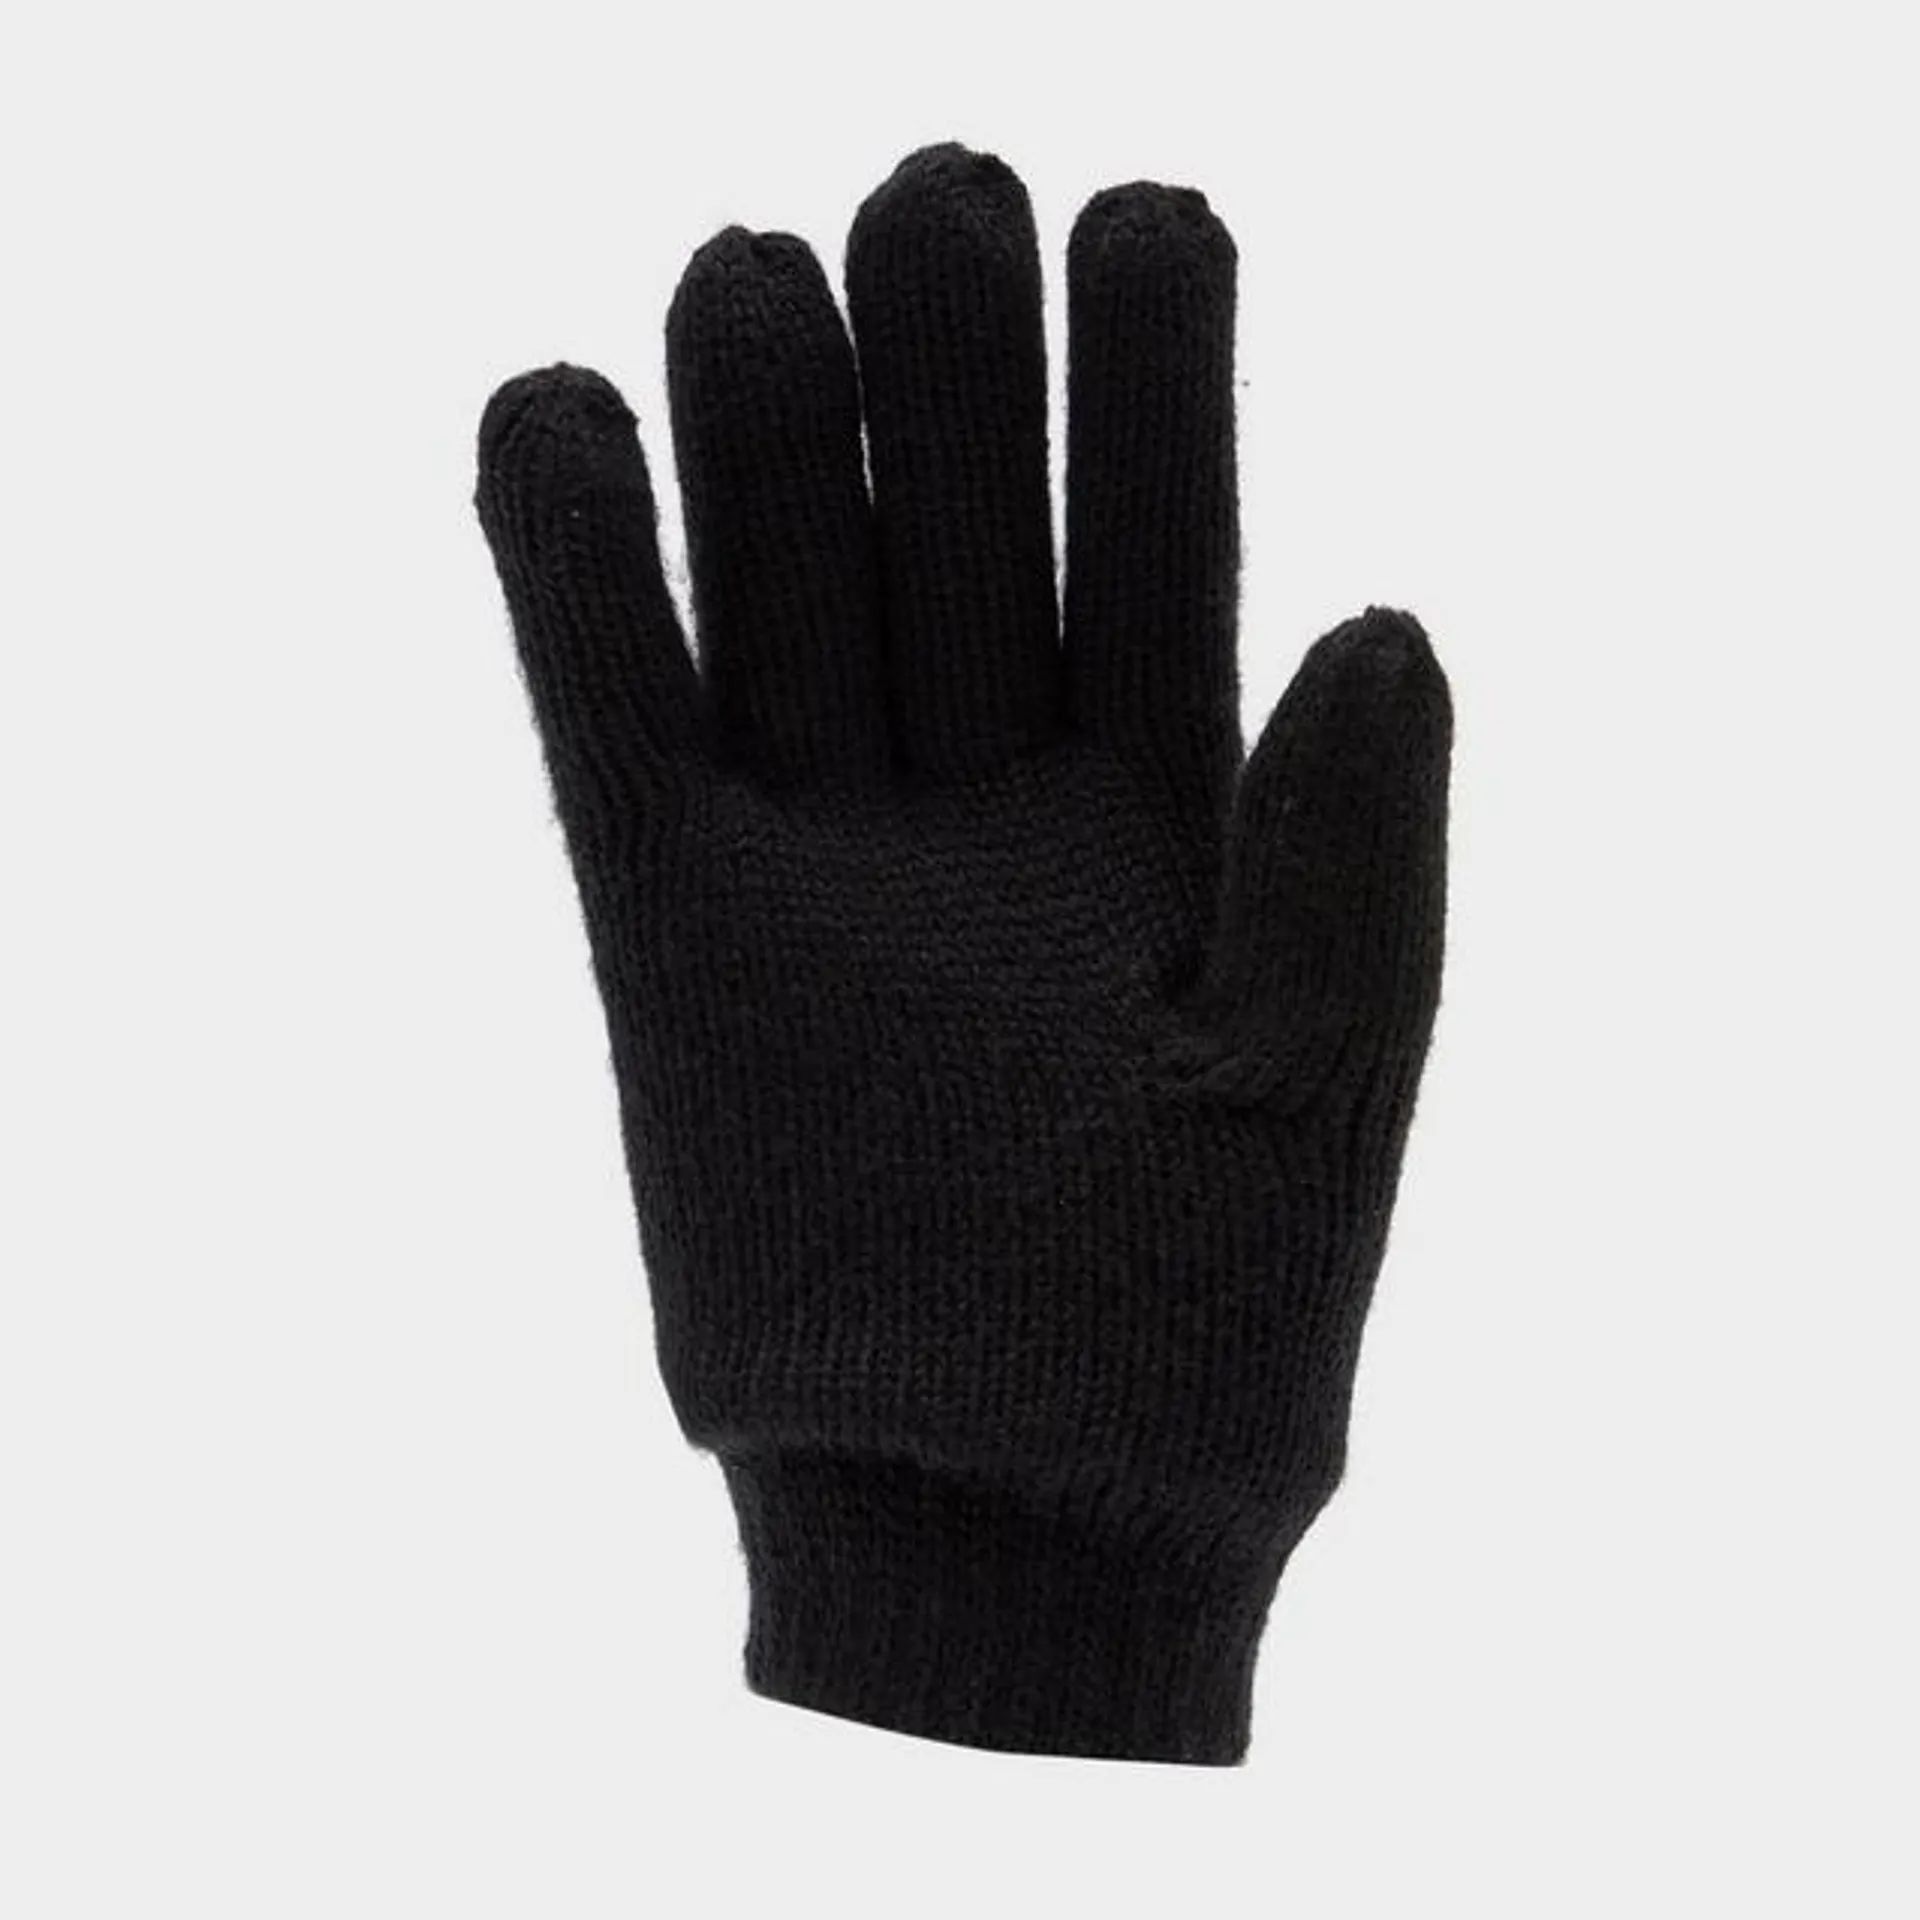 Boys' Thinsulate Knit Gloves